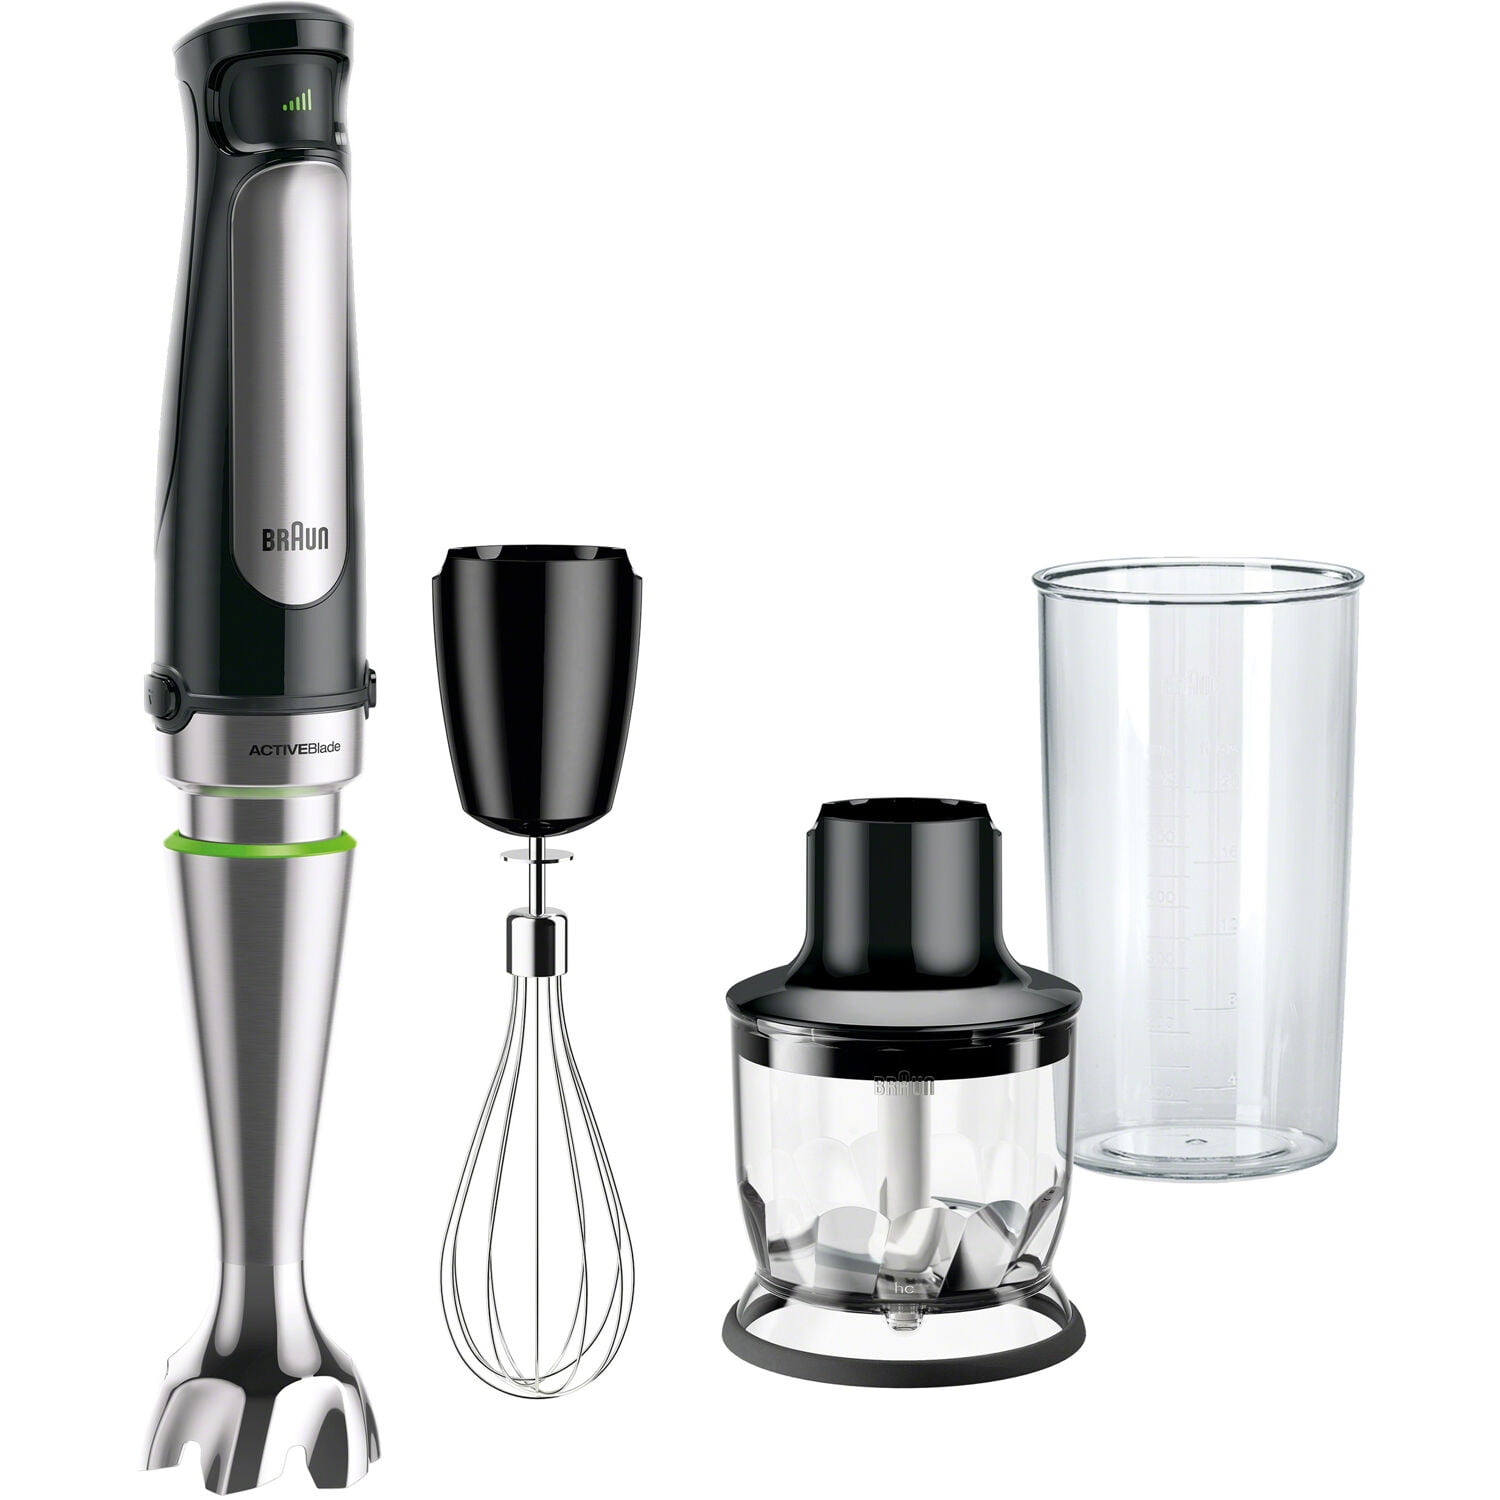  Gavasto Immersion Blender 800 Watts Scratch Resistant Hand  Blender,15 Speed and Turbo Mode Hand Mixer, Heavy Duty Copper Motor  Stainless Steel Smart Stick with Egg Beaters and Chopper/Food Processor:  Home 